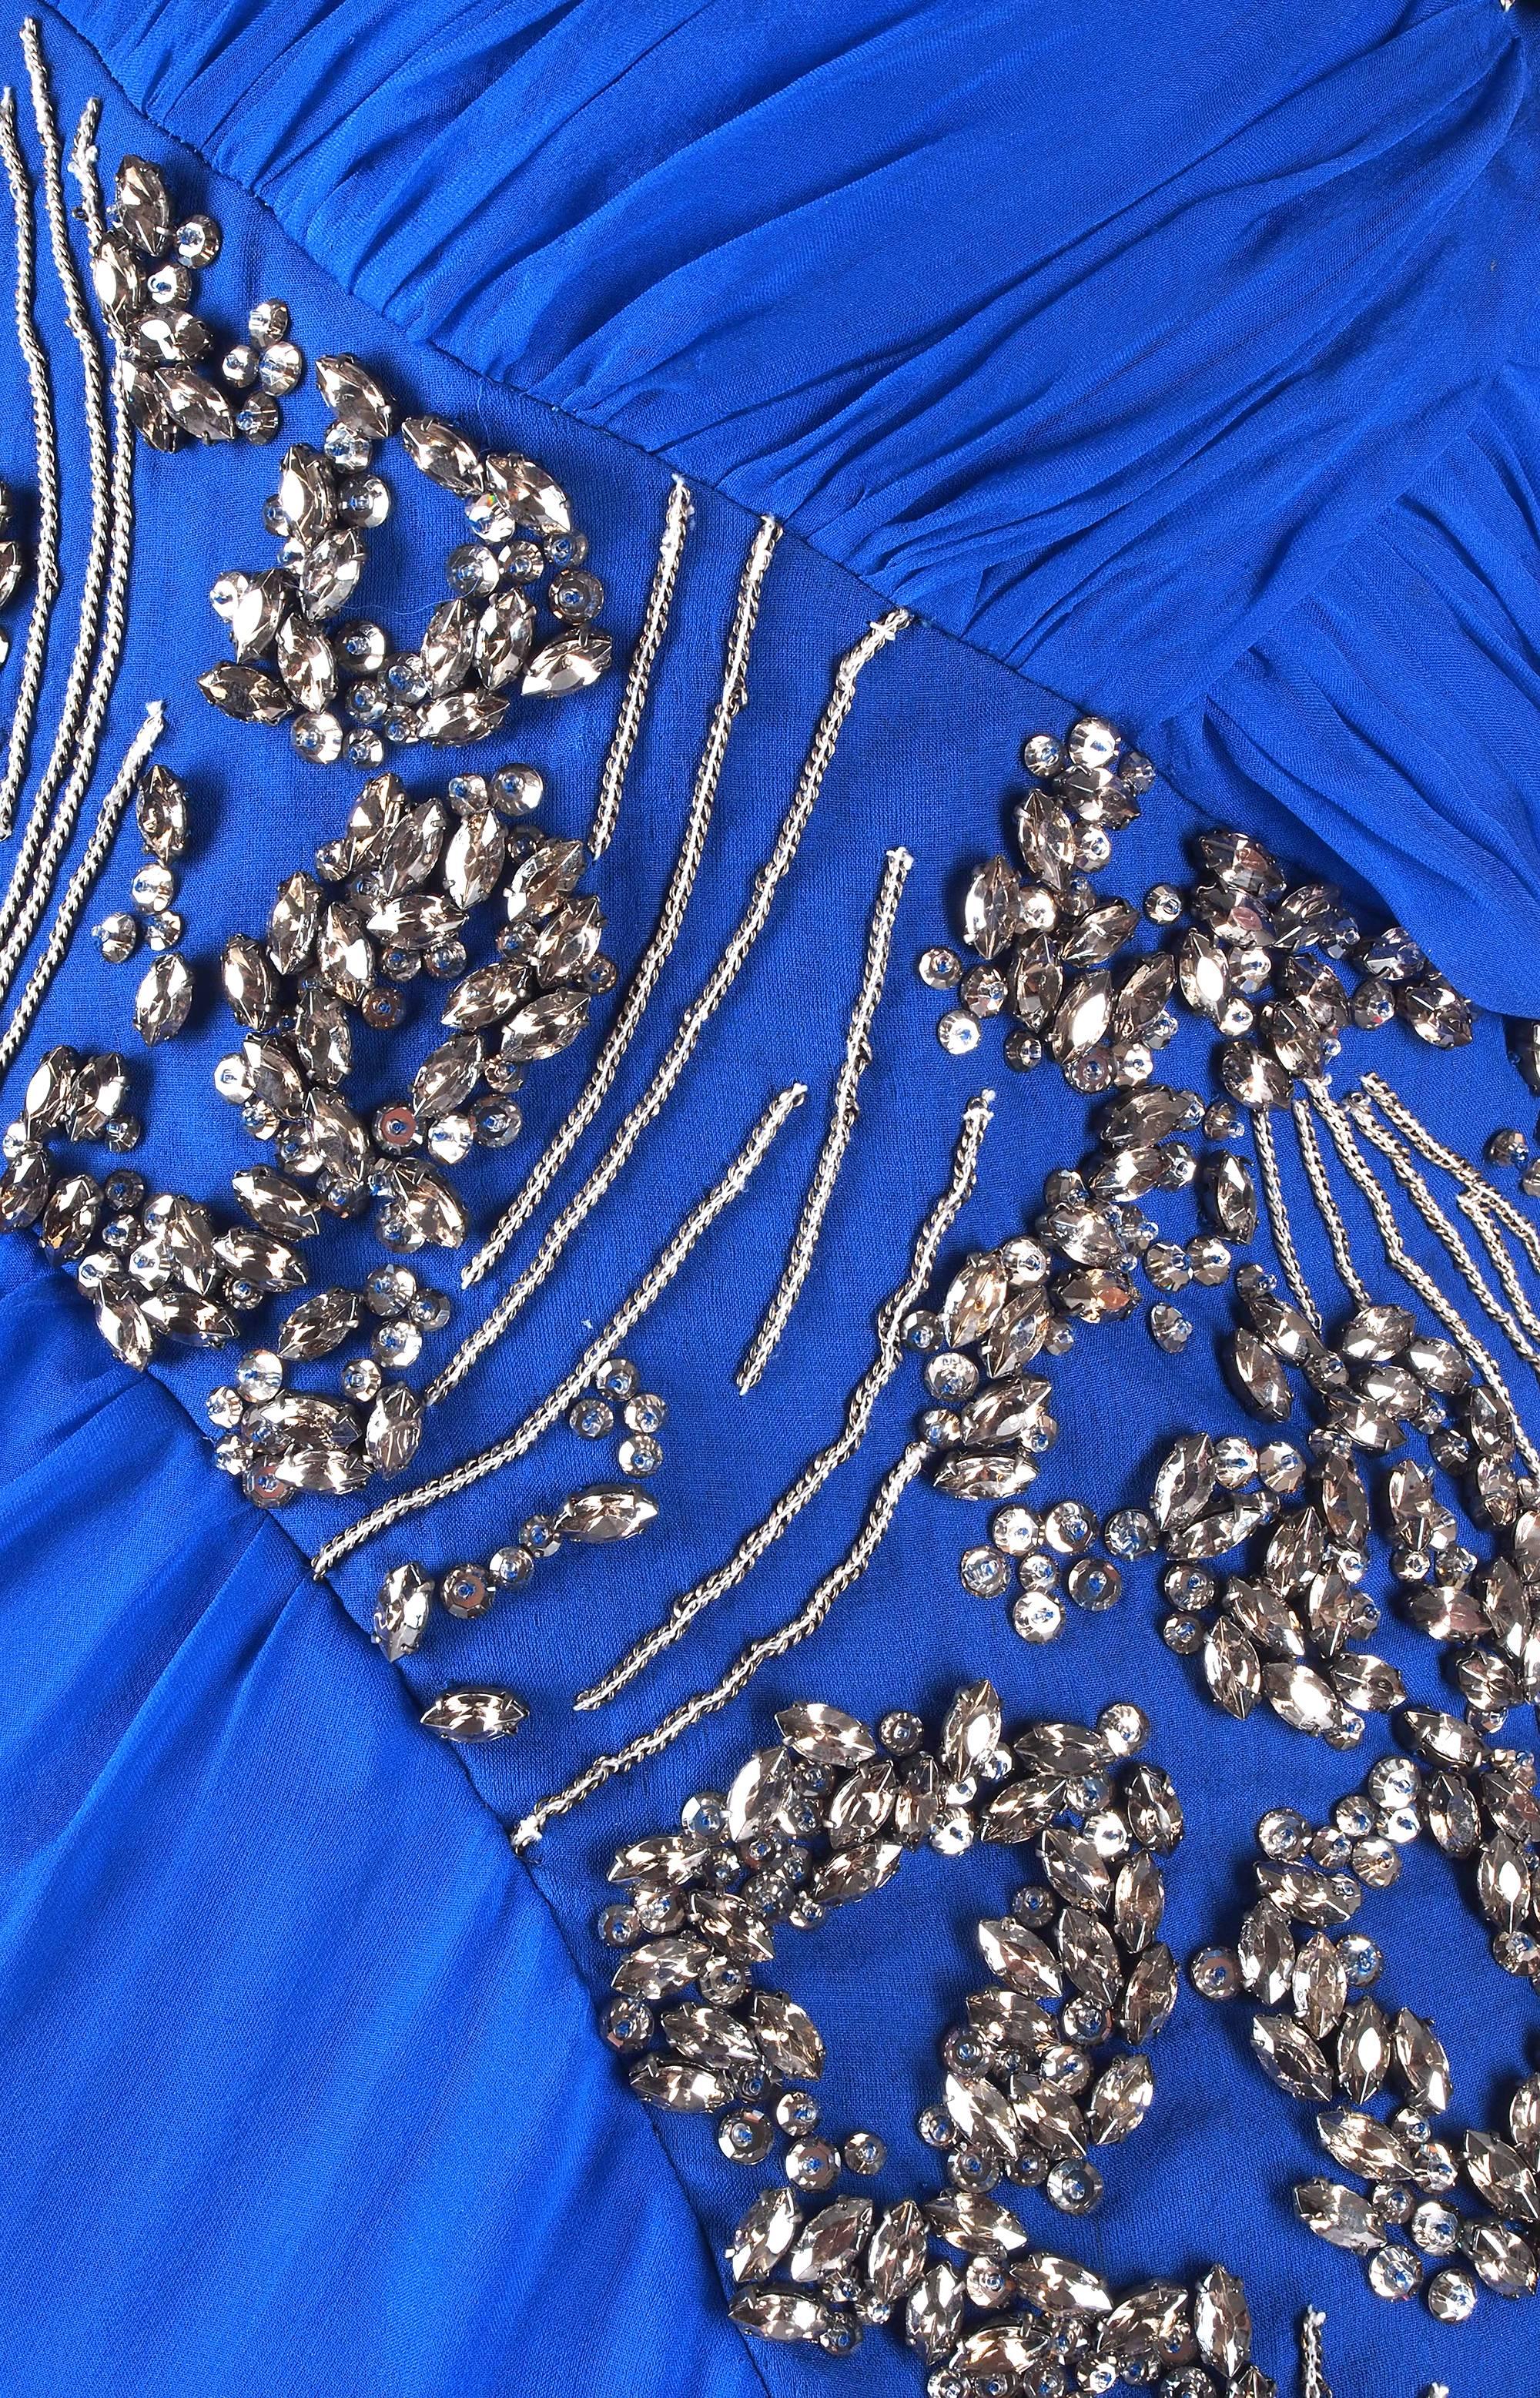 Blue New VERSACE EMBELLISHED ROYAL BLUE CHIFFON SILK GOWN